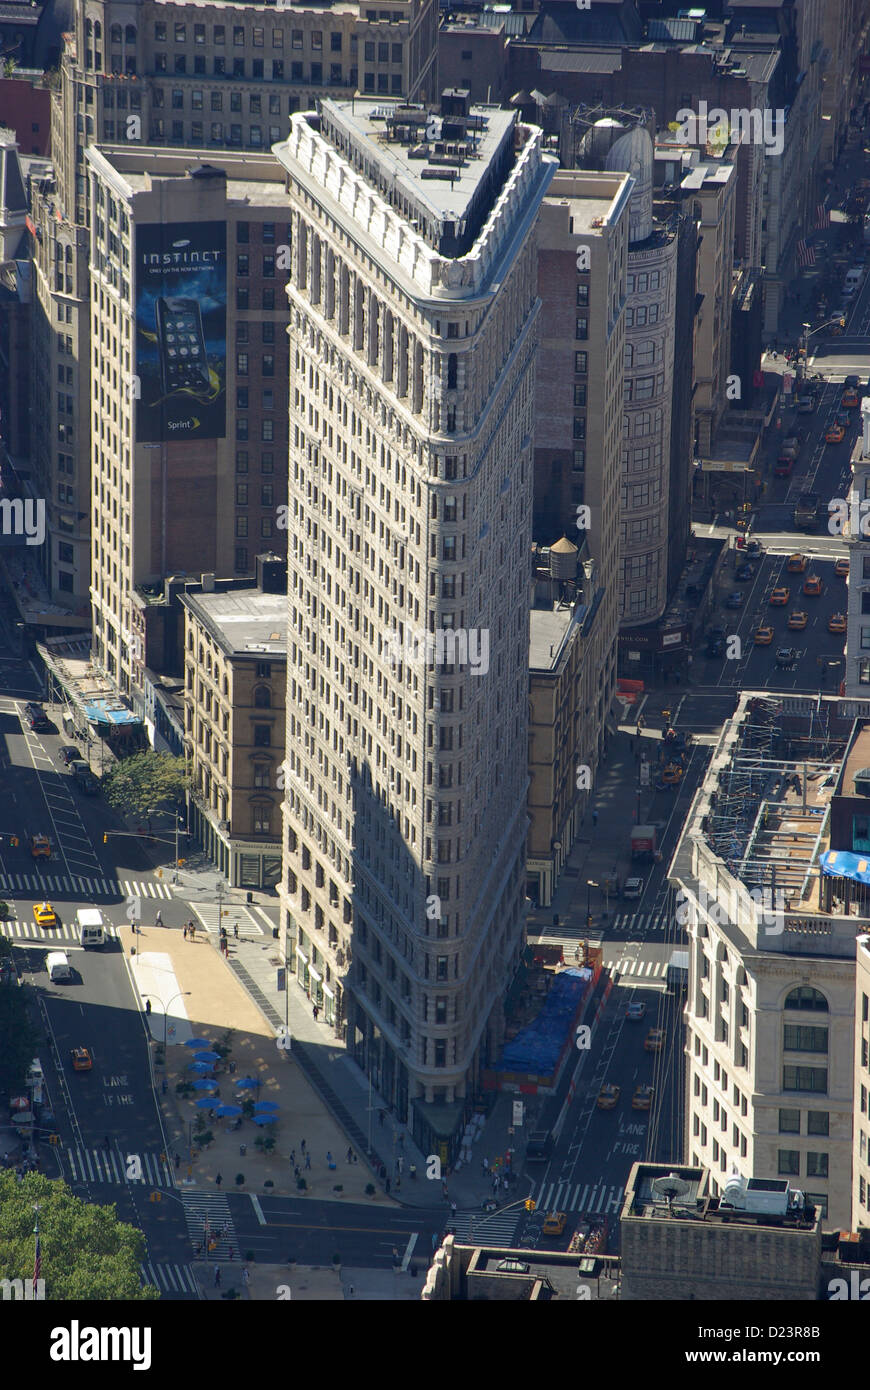 The Fuller Building on East 57th Street in midtown Manhattan in New York  Stock Photo - Alamy